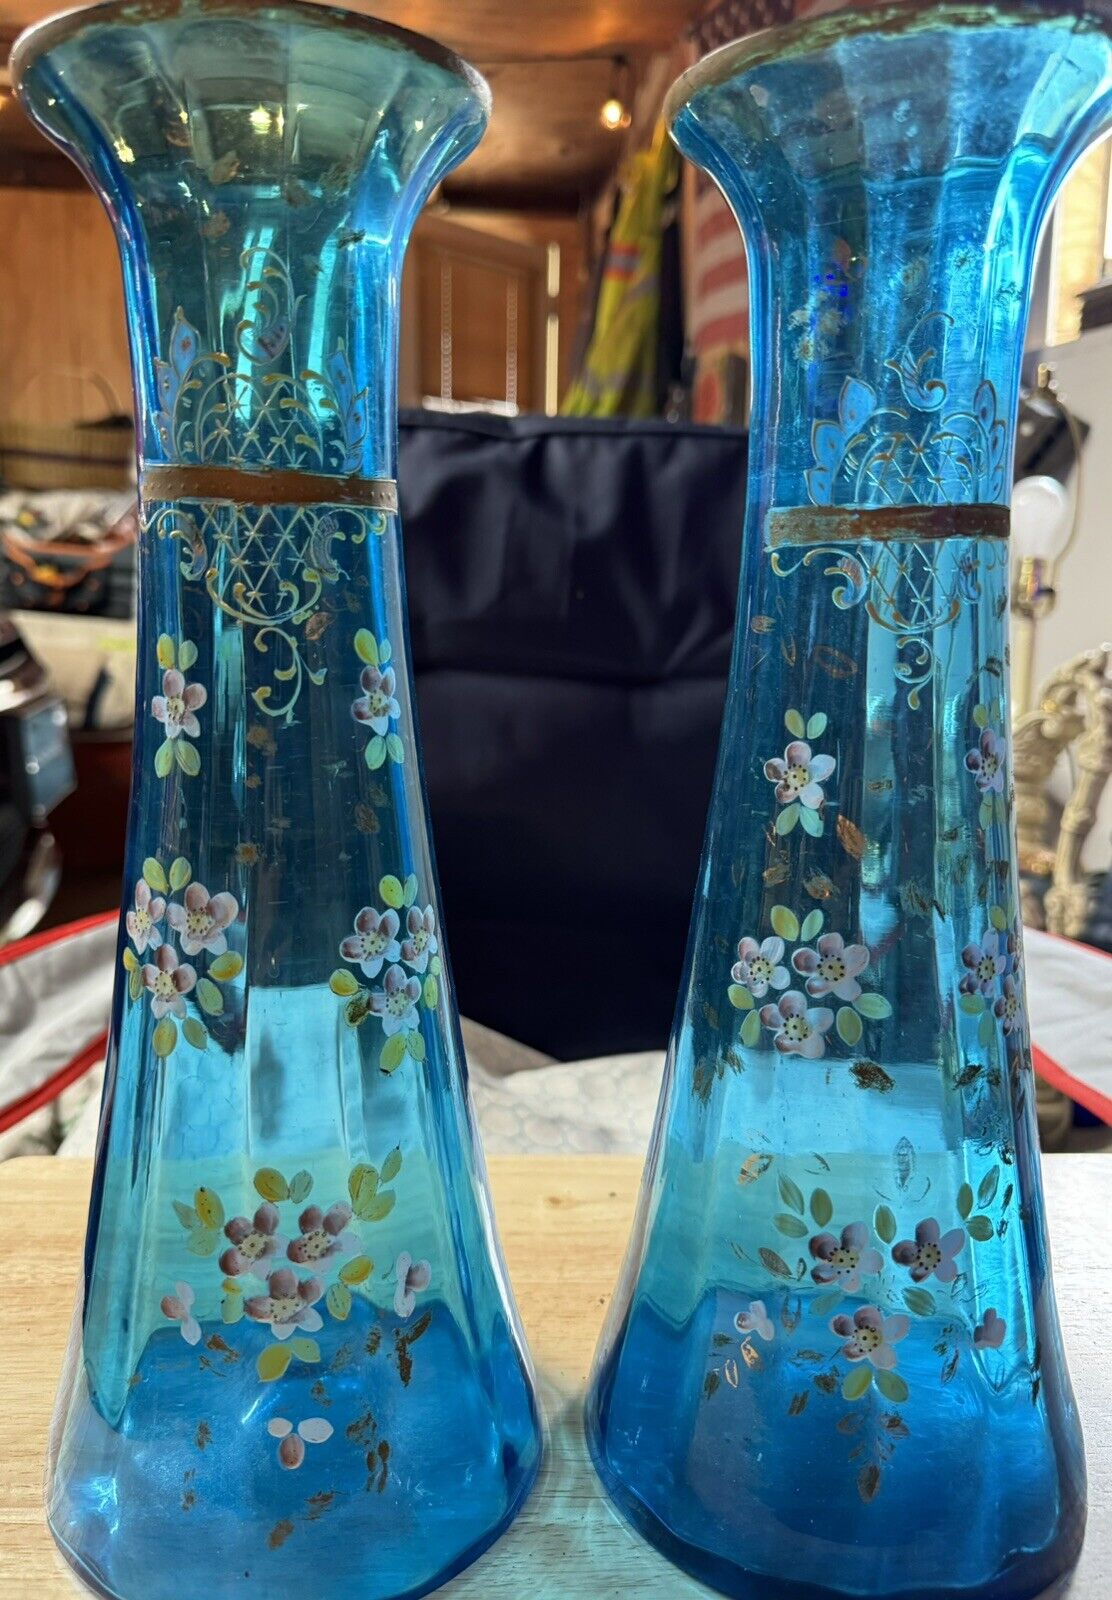 2 Antique Victorian Hand Blown Teal/Blue Glass Hand Painted Floral Optic Vases😳